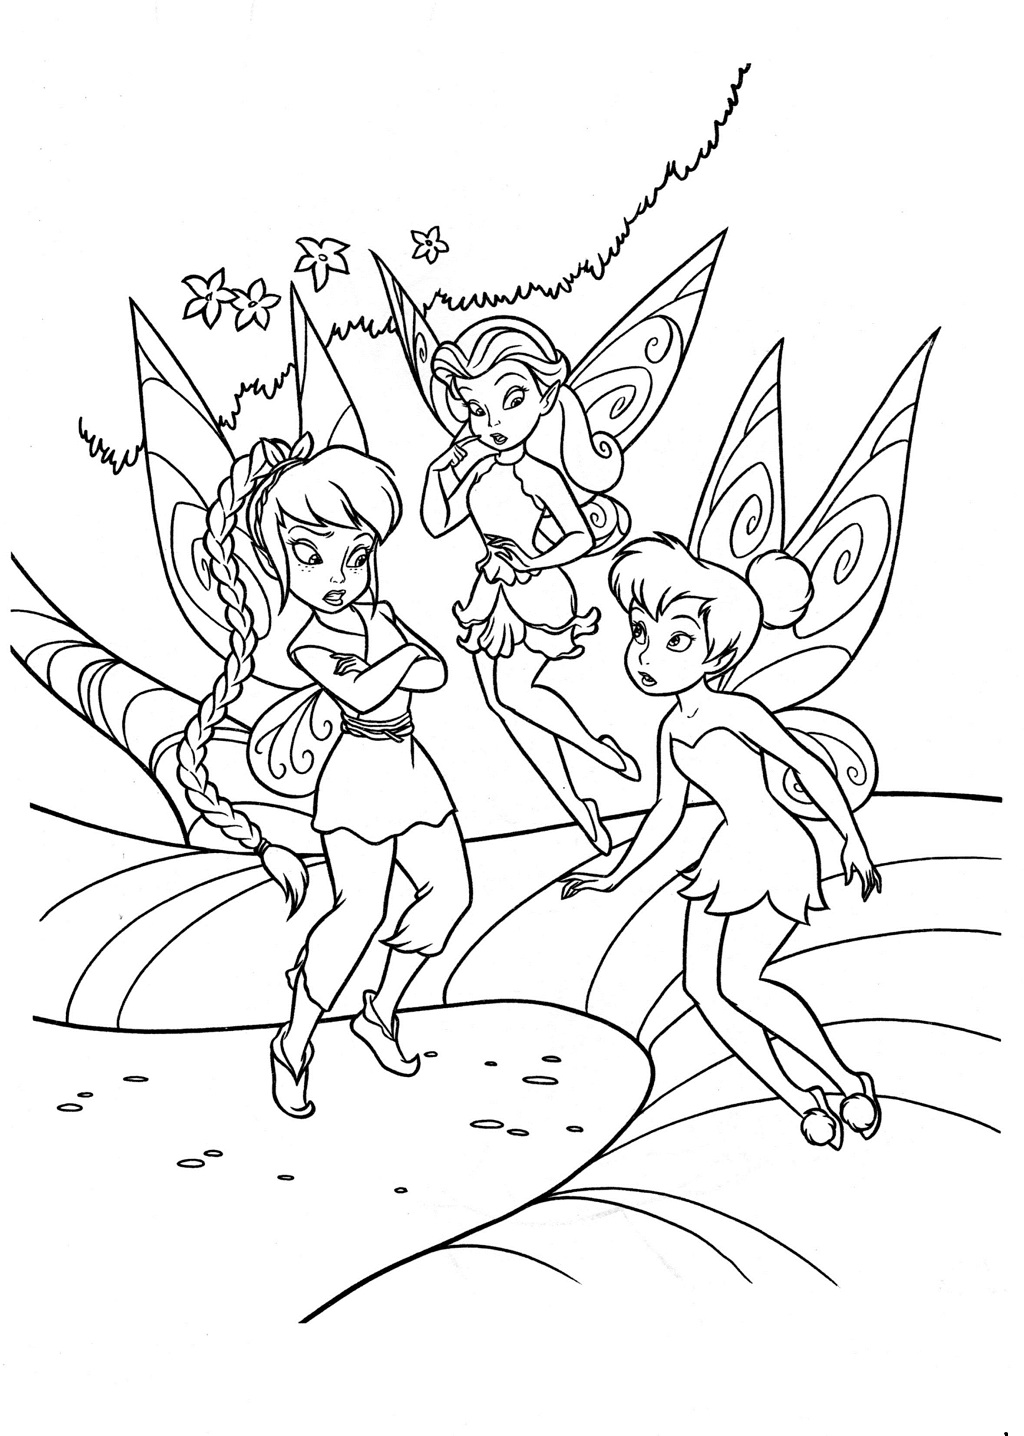 Fairies Coloring Pages (3) - Coloringkids.org